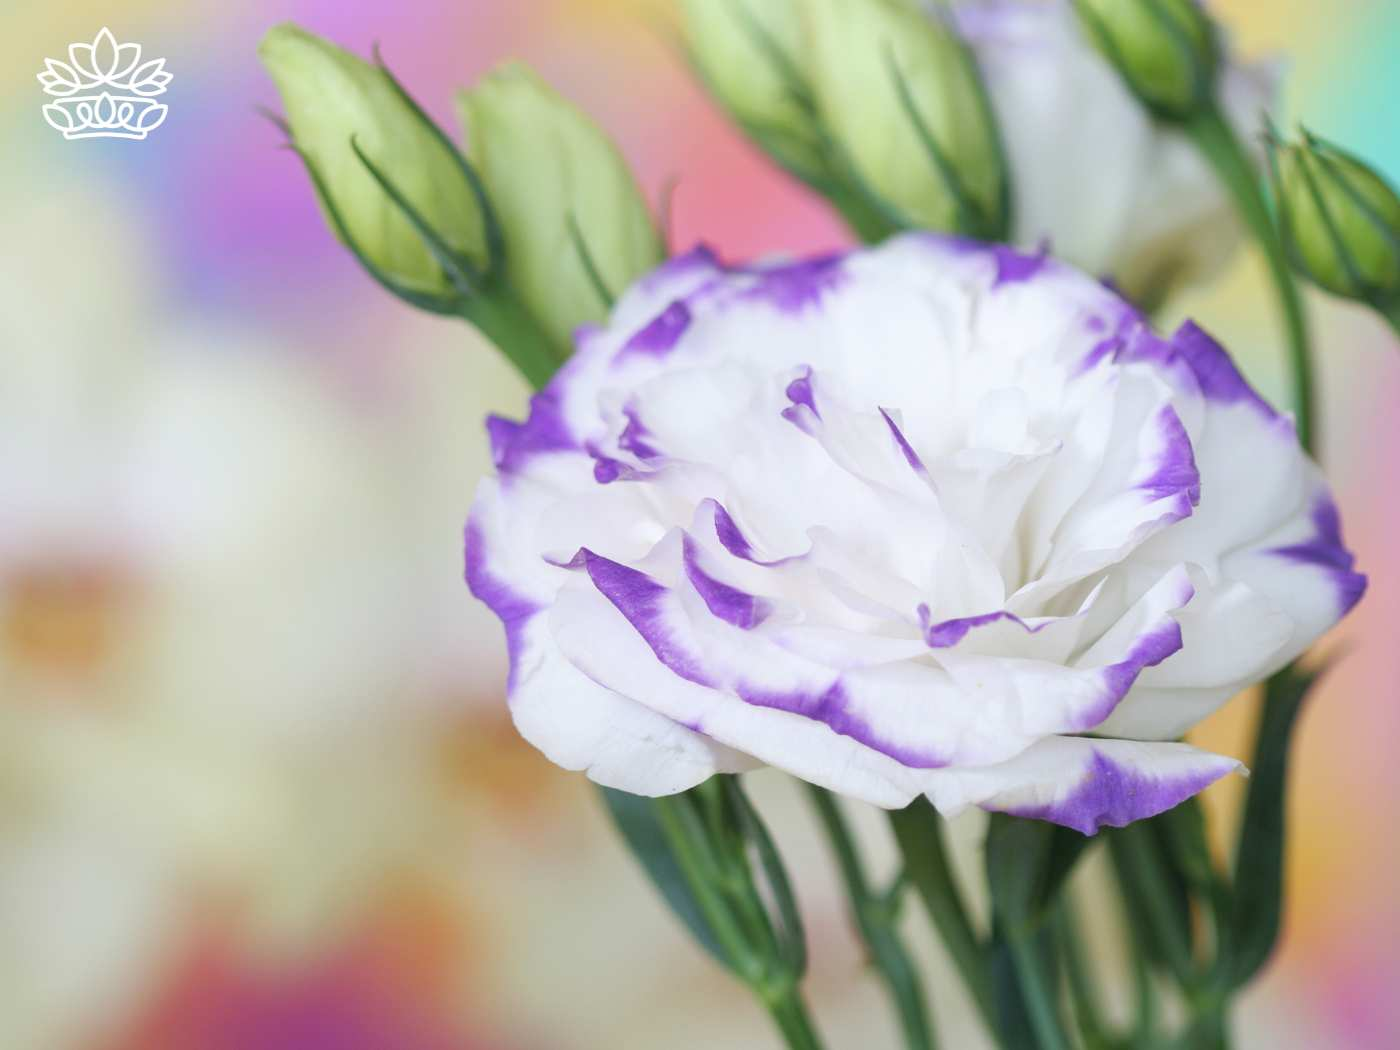 Close-up of a striking white and purple lisianthus flower with soft focus on its delicate petals, part of the Lisianthus Collection by Fabulous Flowers and Gifts. This image beautifully captures the intricate details and vibrant colours of the bloom.